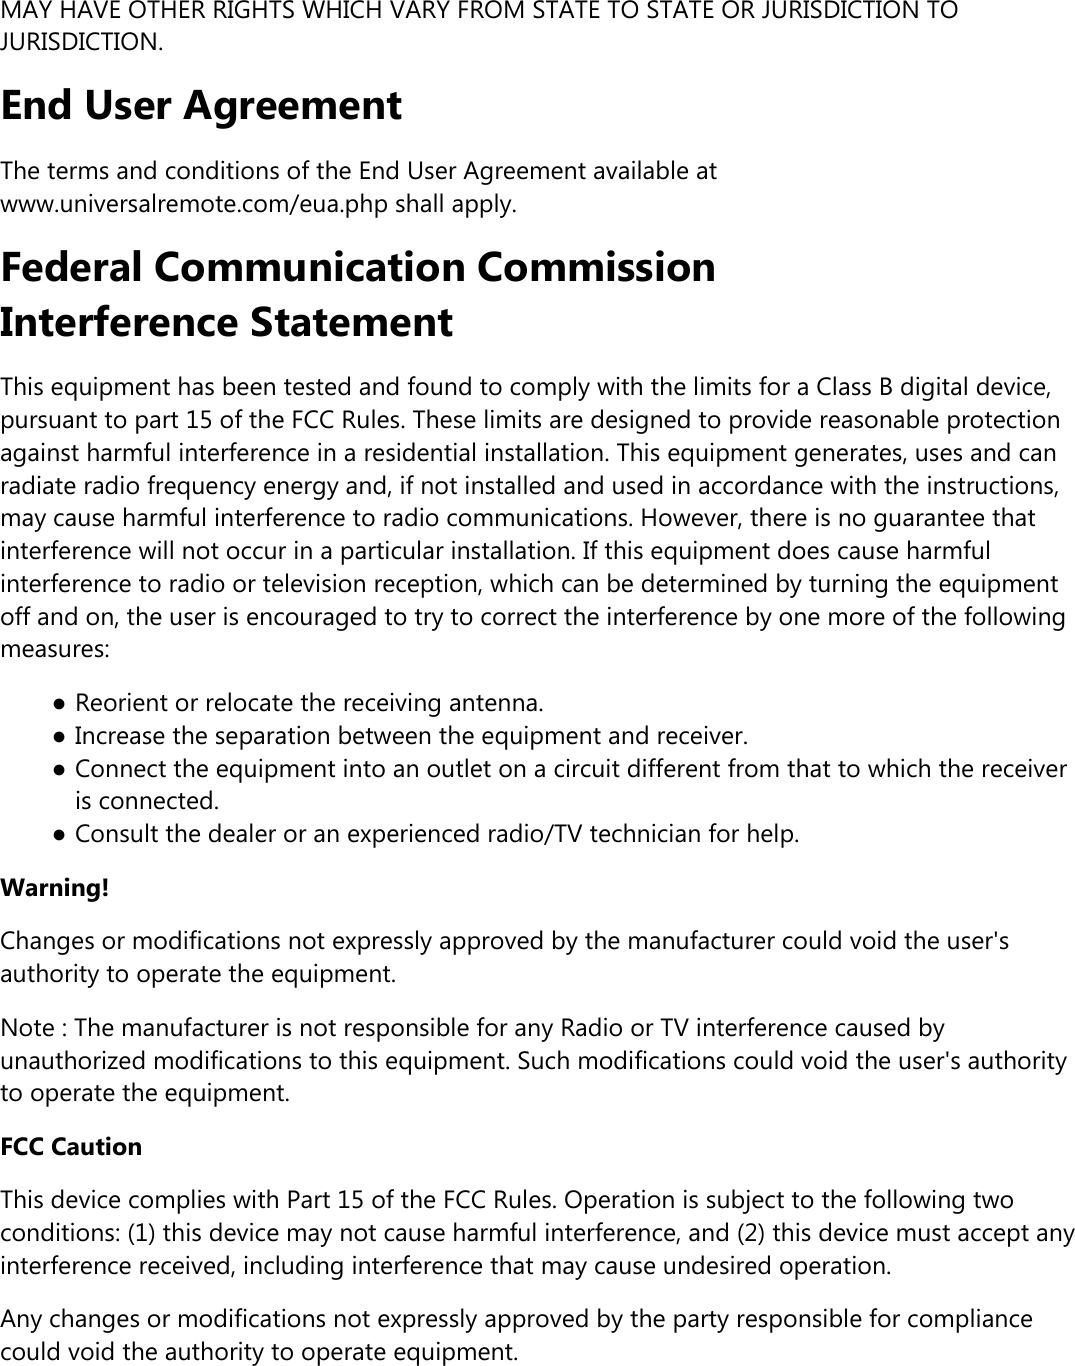 MAY HAVE OTHER RIGHTS WHICH VARY FROM STATE TO STATE OR JURISDICTION TOJURISDICTION.End User AgreementThe terms and conditions of the End User Agreement available atwww.universalremote.com/eua.php shall apply.Federal Communication CommissionInterference StatementThis equipment has been tested and found to comply with the limits for a Class B digital device,pursuant to part 15 of the FCC Rules. These limits are designed to provide reasonable protectionagainst harmful interference in a residential installation. This equipment generates, uses and canradiate radio frequency energy and, if not installed and used in accordance with the instructions,may cause harmful interference to radio communications. However, there is no guarantee thatinterference will not occur in a particular installation. If this equipment does cause harmfulinterference to radio or television reception, which can be determined by turning the equipmentoff and on, the user is encouraged to try to correct the interference by one more of the followingmeasures:●Reorient or relocate the receiving antenna.●Increase the separation between the equipment and receiver.●Connect the equipment into an outlet on a circuit different from that to which the receiveris connected.●Consult the dealer or an experienced radio/TV technician for help.Warning!Changes or modifications not expressly approved by the manufacturer could void the user&apos;sauthority to operate the equipment.Note : The manufacturer is not responsible for any Radio or TV interference caused byunauthorized modifications to this equipment. Such modifications could void the user&apos;s authorityto operate the equipment.FCC CautionThis device complies with Part 15 of the FCC Rules. Operation is subject to the following twoconditions: (1) this device may not cause harmful interference, and (2) this device must accept anyinterference received, including interference that may cause undesired operation.Any changes or modifications not expressly approved by the party responsible for compliancecould void the authority to operate equipment.